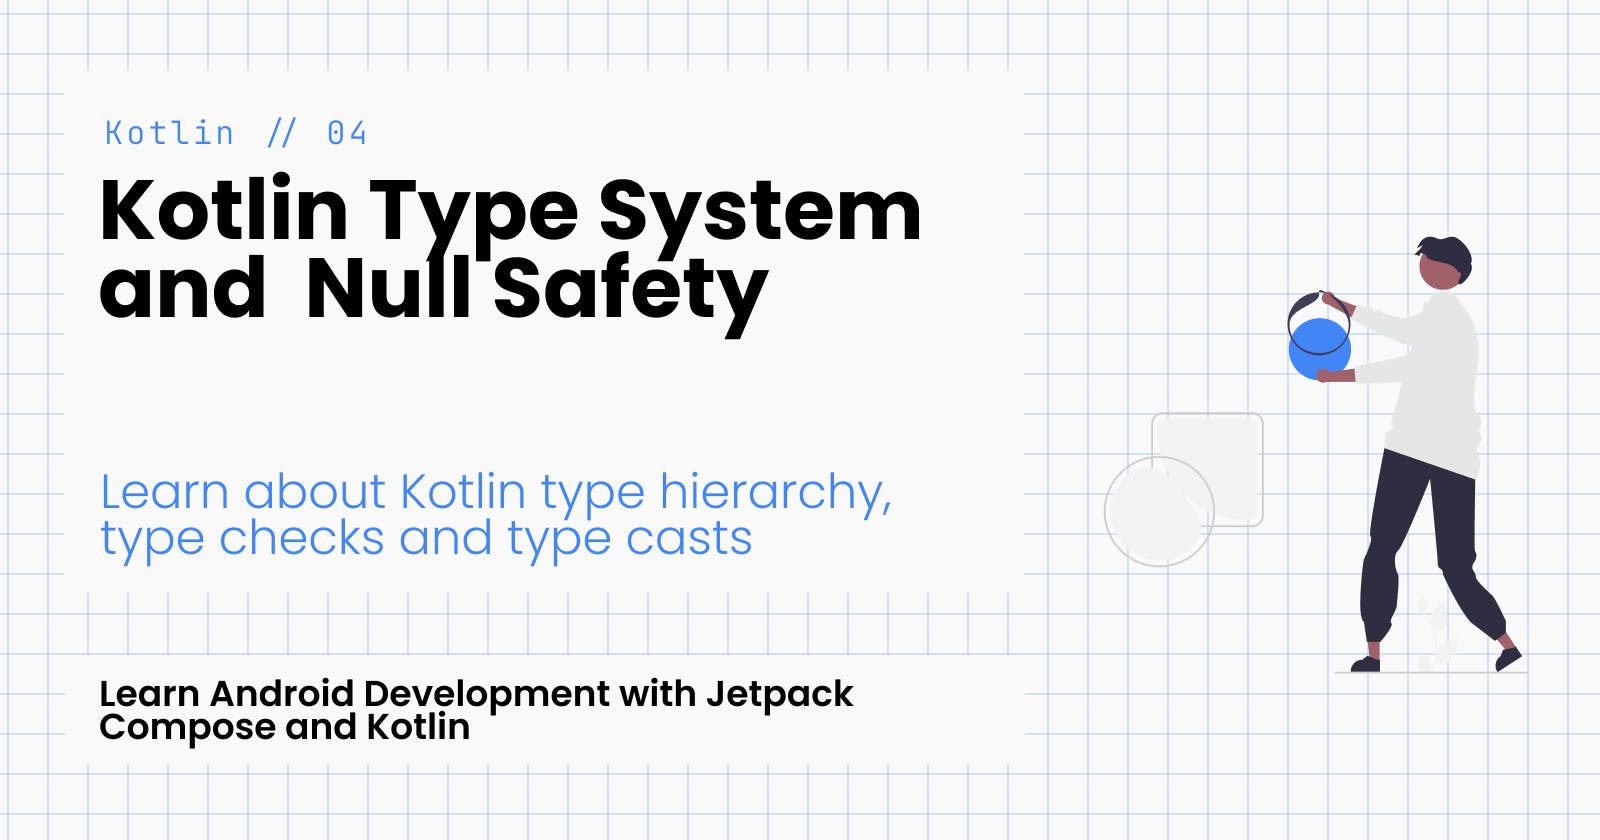 Exploring the Kotlin Type System and understanding Null Safety